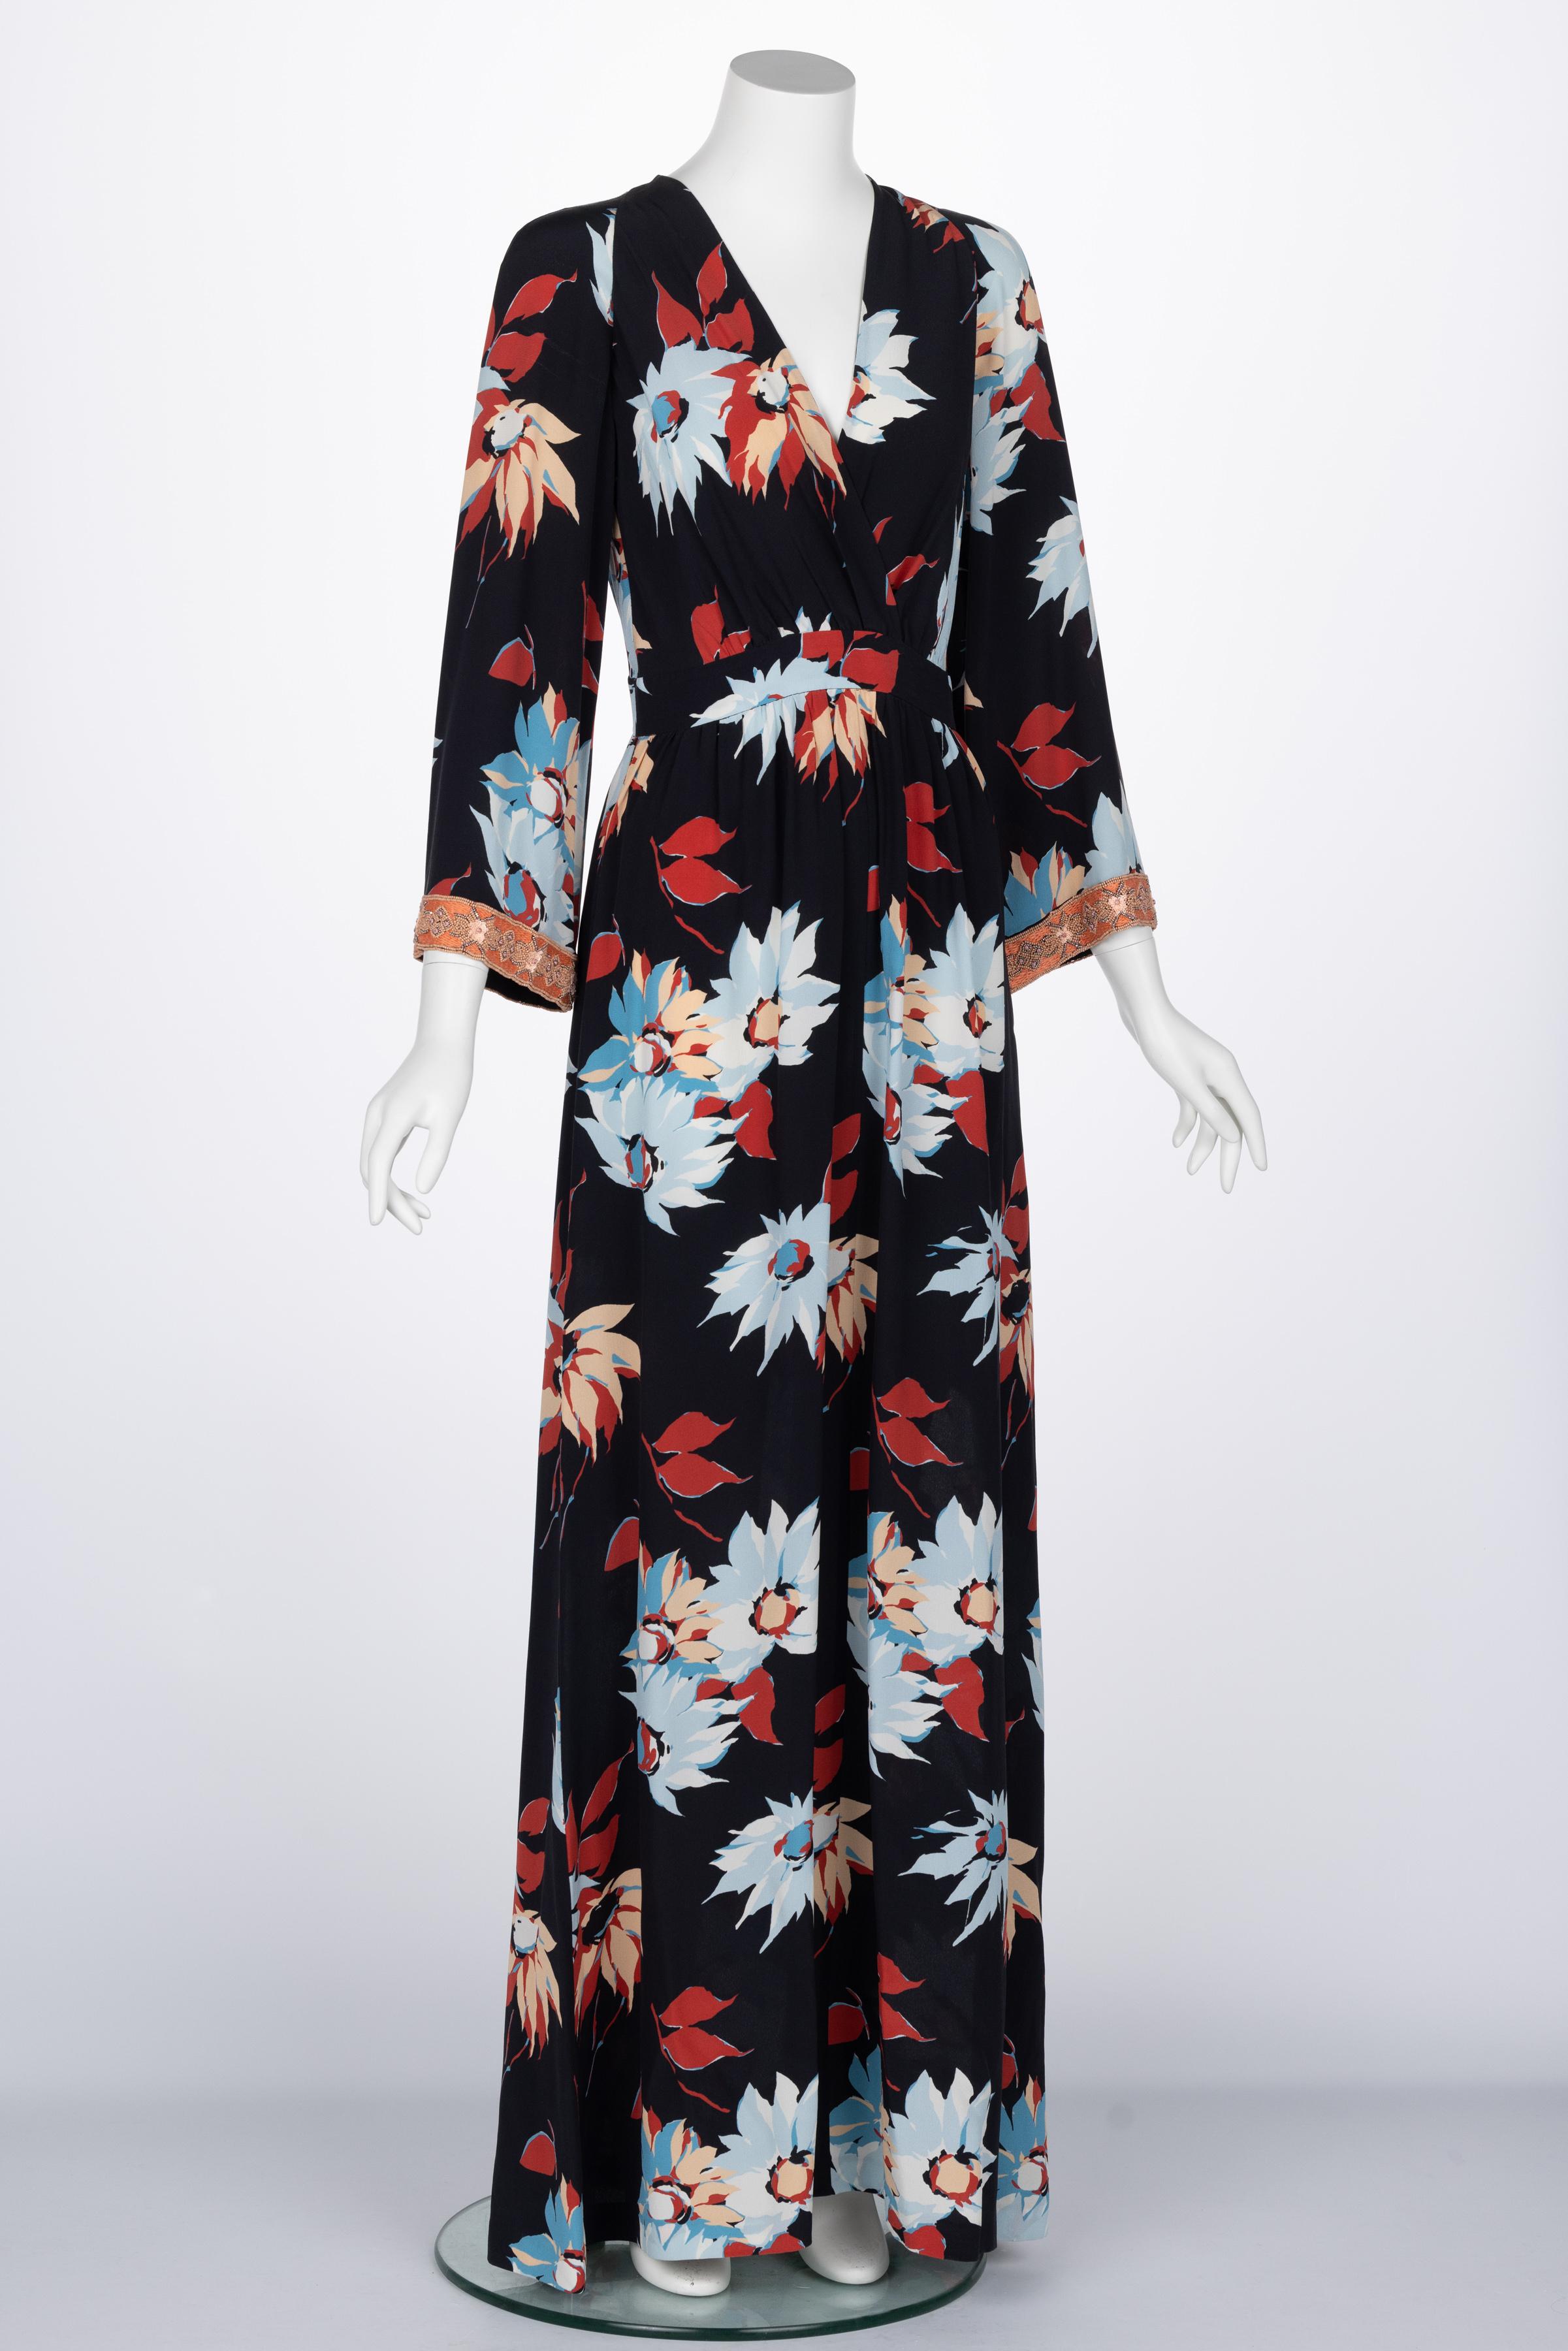 Etro Floral Beaded Trim Maxi Dress In Excellent Condition For Sale In Boca Raton, FL